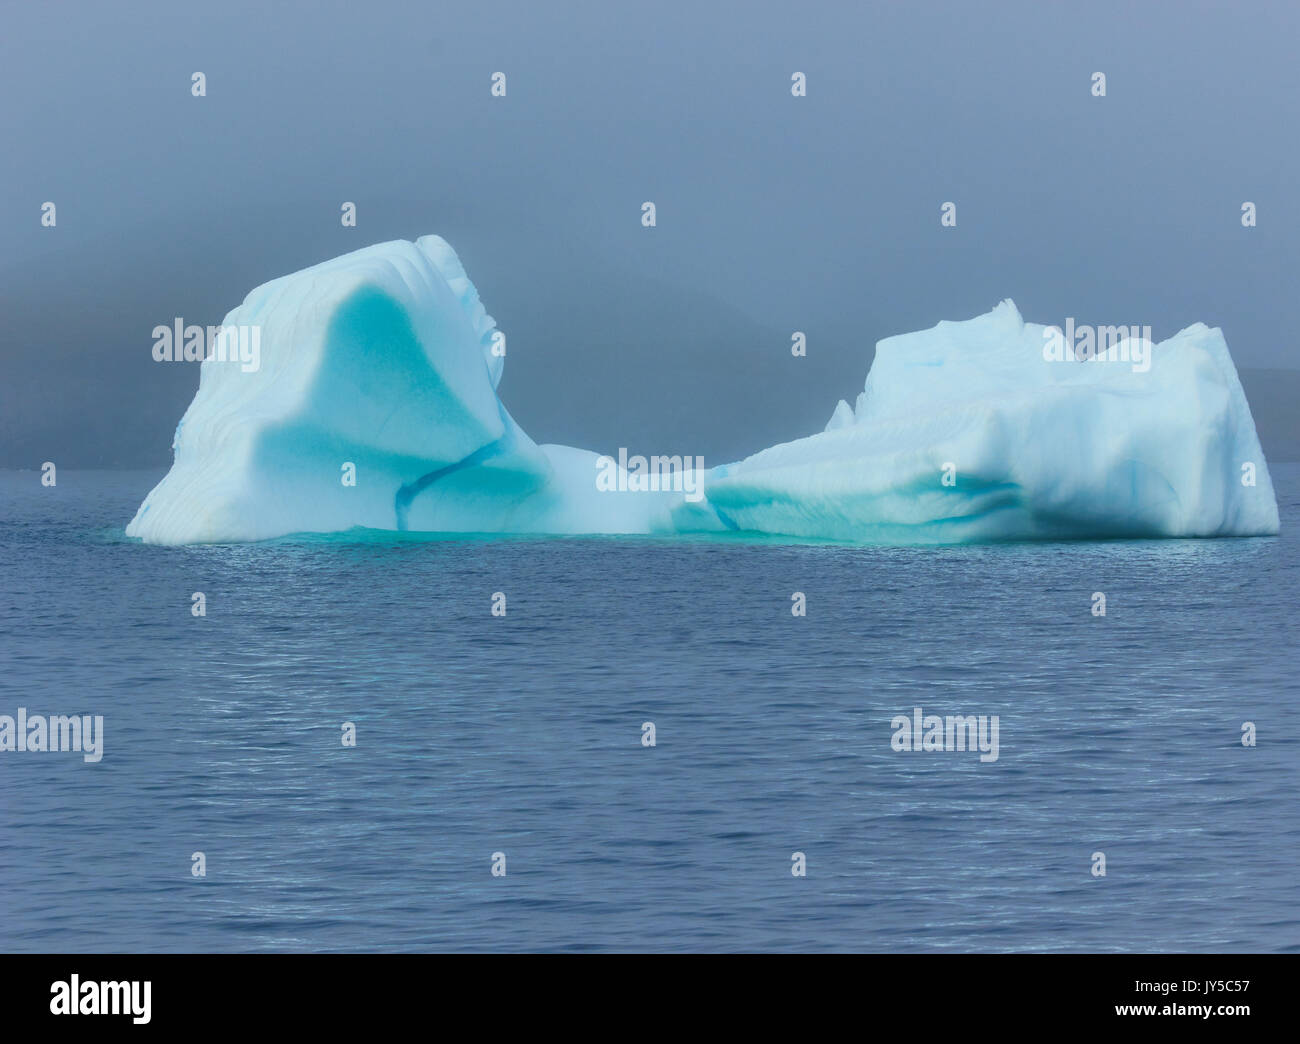 Blue iceberg off the shore of the community of St Lunaire Griquet at the tip of the Great Northern Peninsula, Newfoundland, Canada Stock Photo